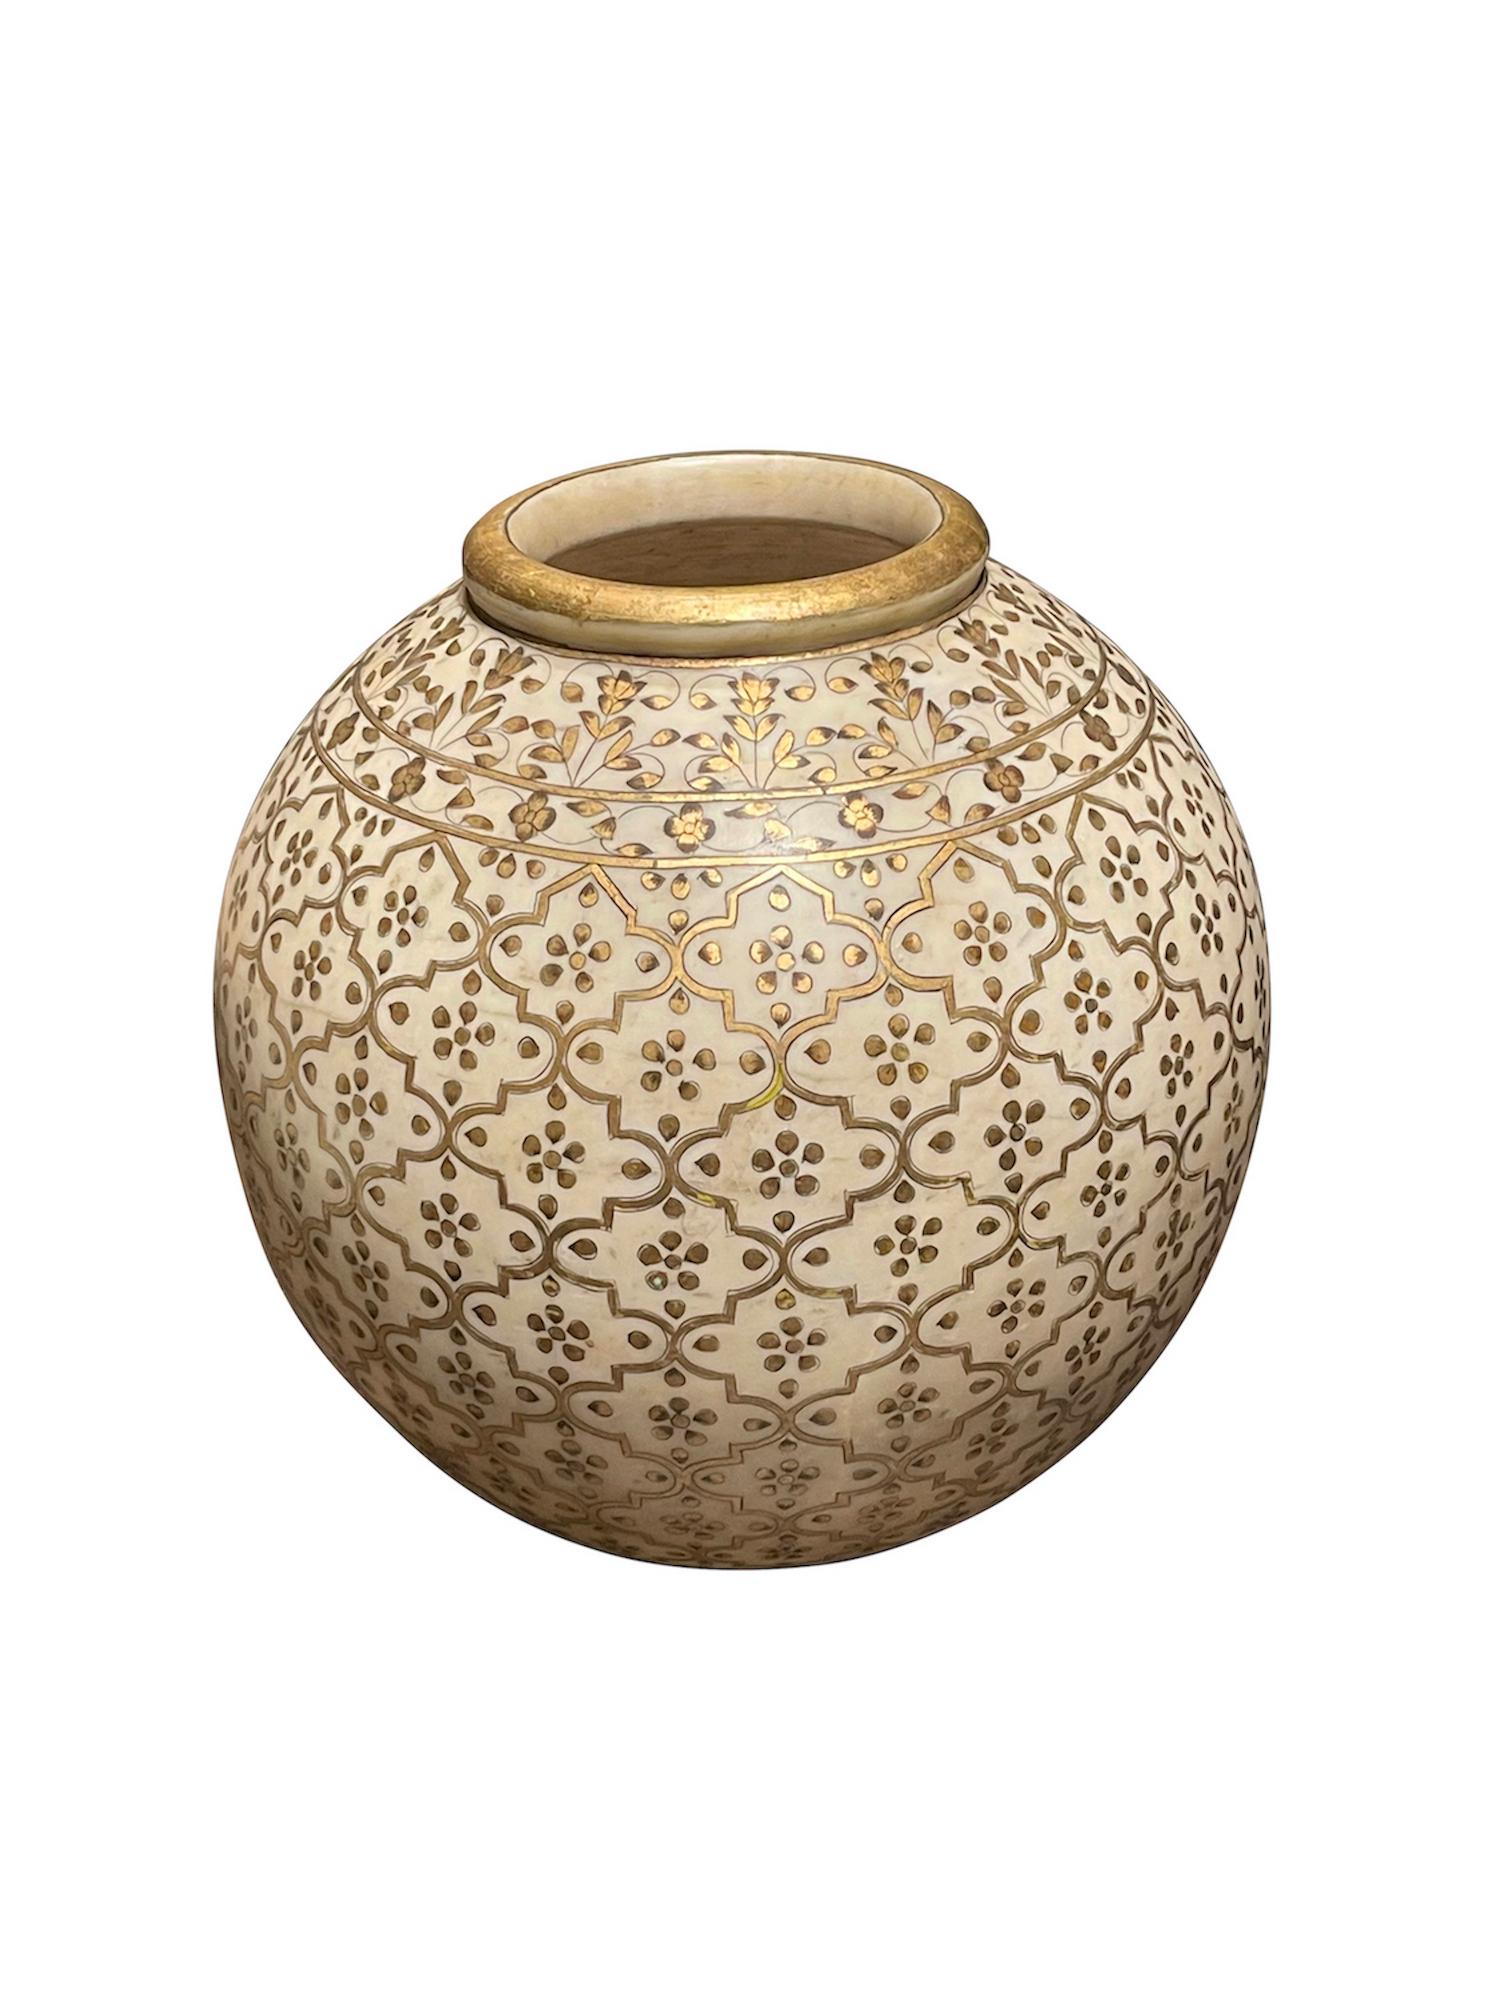 Contemporary Indian white marble bowl with decorative printed gold overlay.
Gold trims the opening.
